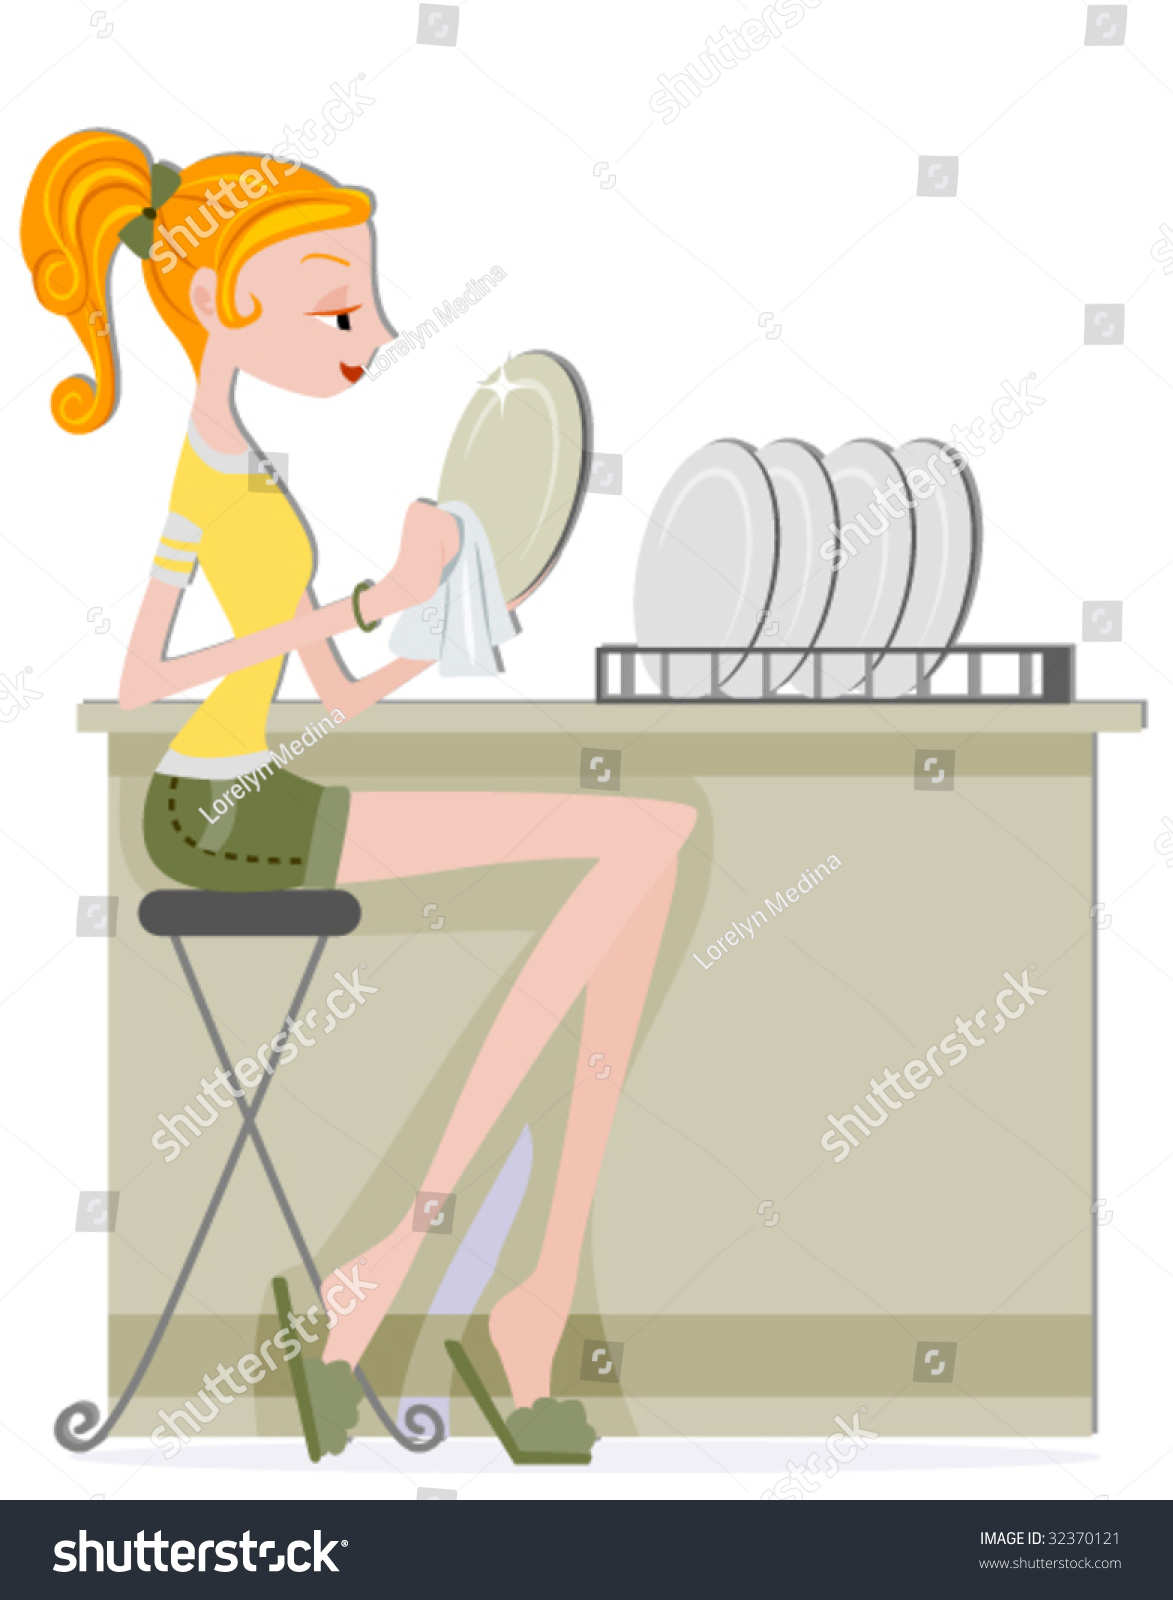 She the dishes already. Dry the dishes picture for Kids. Clean Plates picture cartoon. Washing dishes advertising poster PNG.